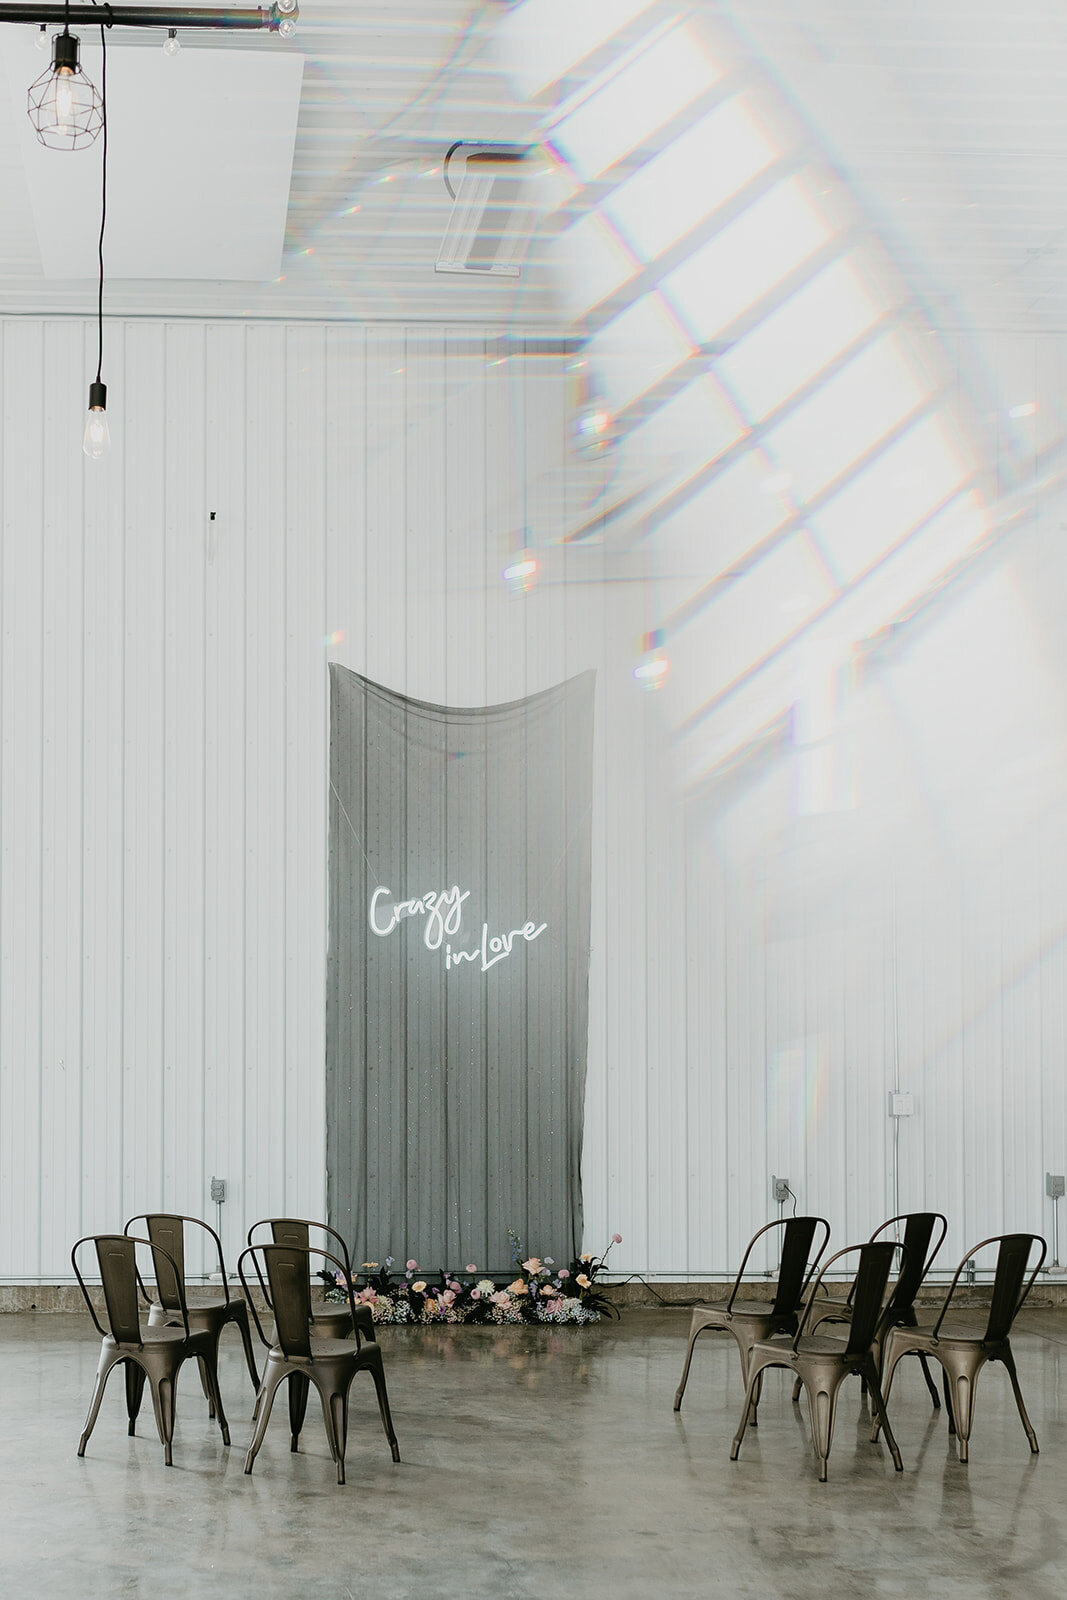 Holographic inspired wedding ceremony at 52 North Venue, an industrial and unique wedding venue in Sylvan Lake, AB, featured on the Brontë Bride Vendor Guide.52 North Venue, an industrial and unique wedding venue in Sylvan Lake, AB, featured on the Brontë Bride Vendor Guide.